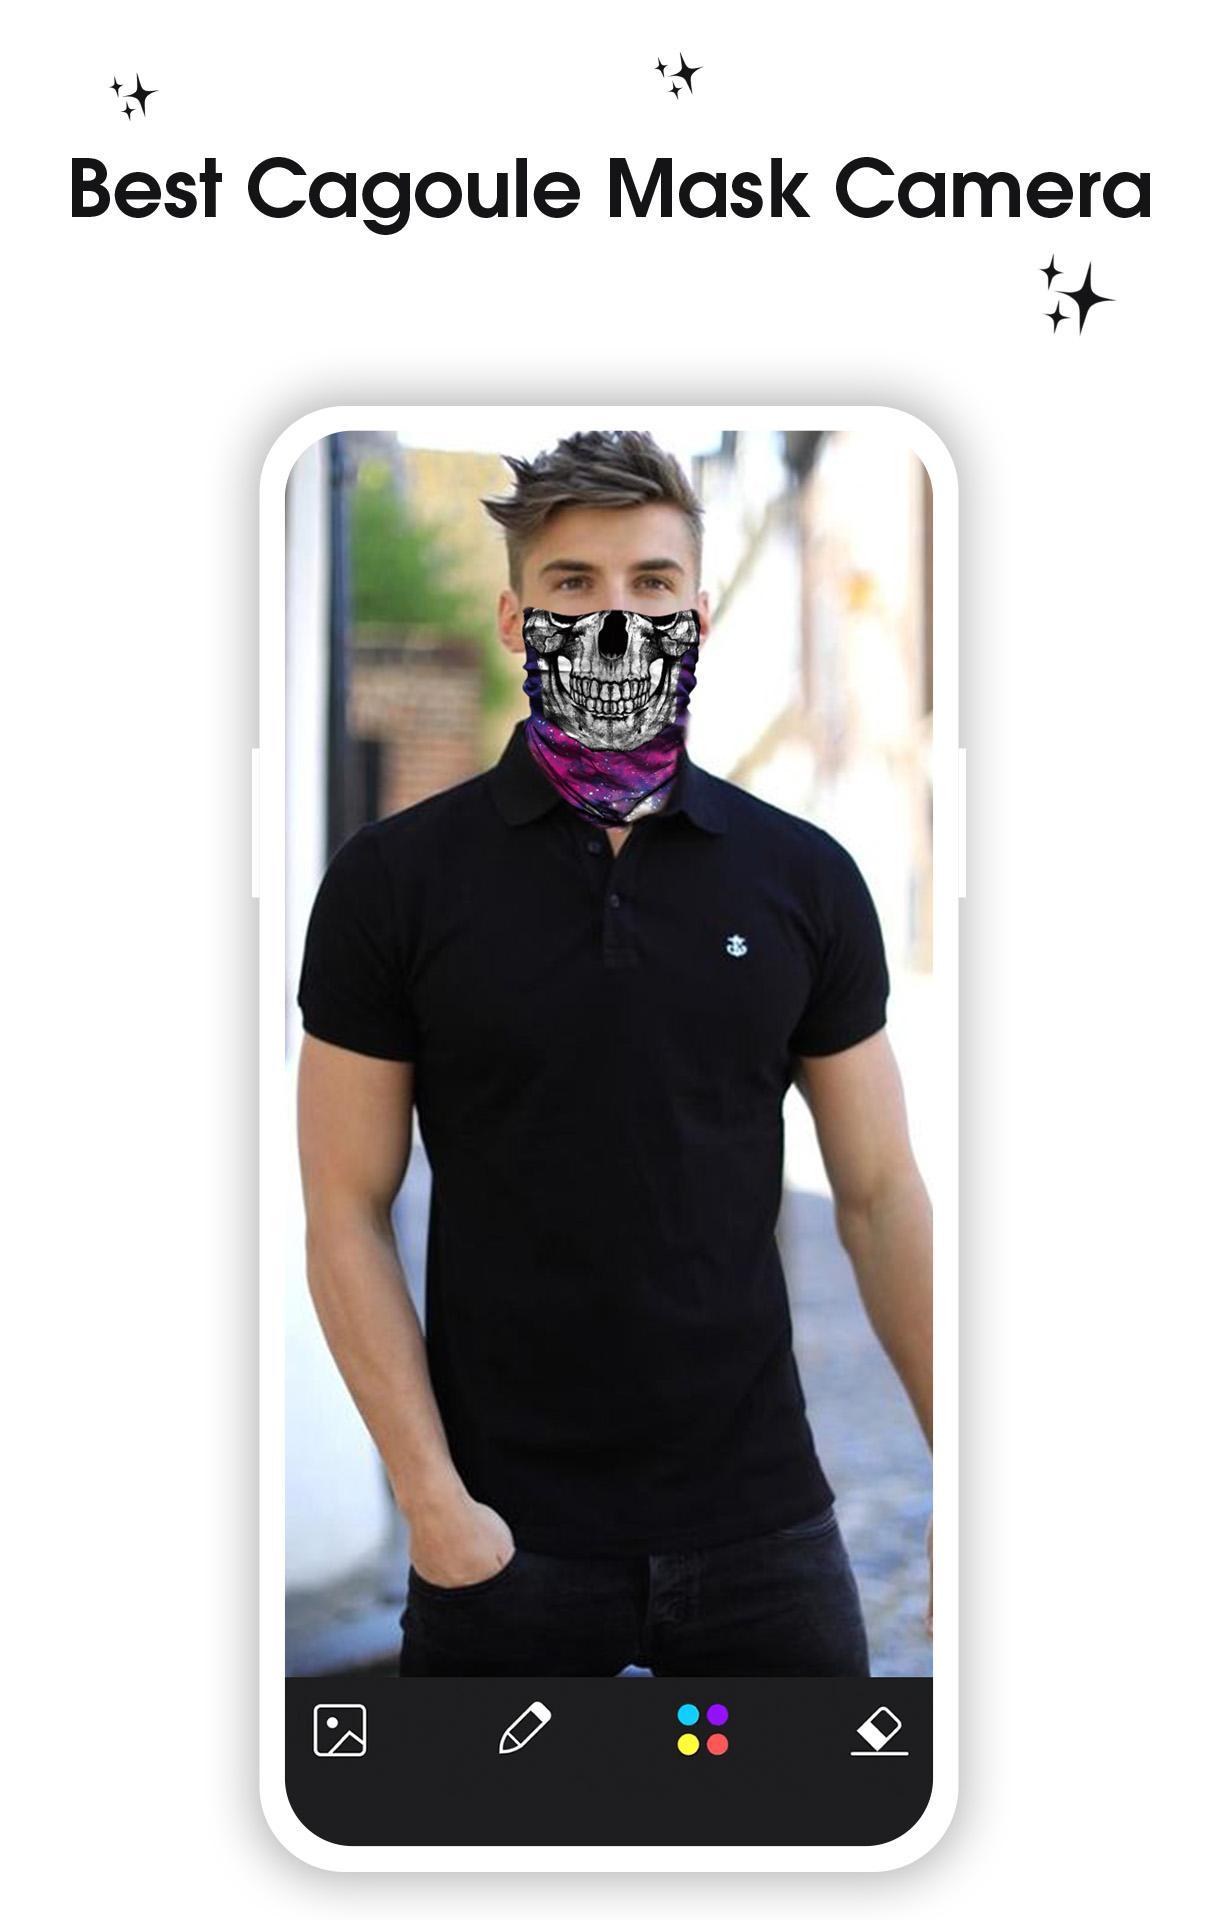 Cagoule Mask Half Face - Ghost Mask Photo Editor APK voor Android Download